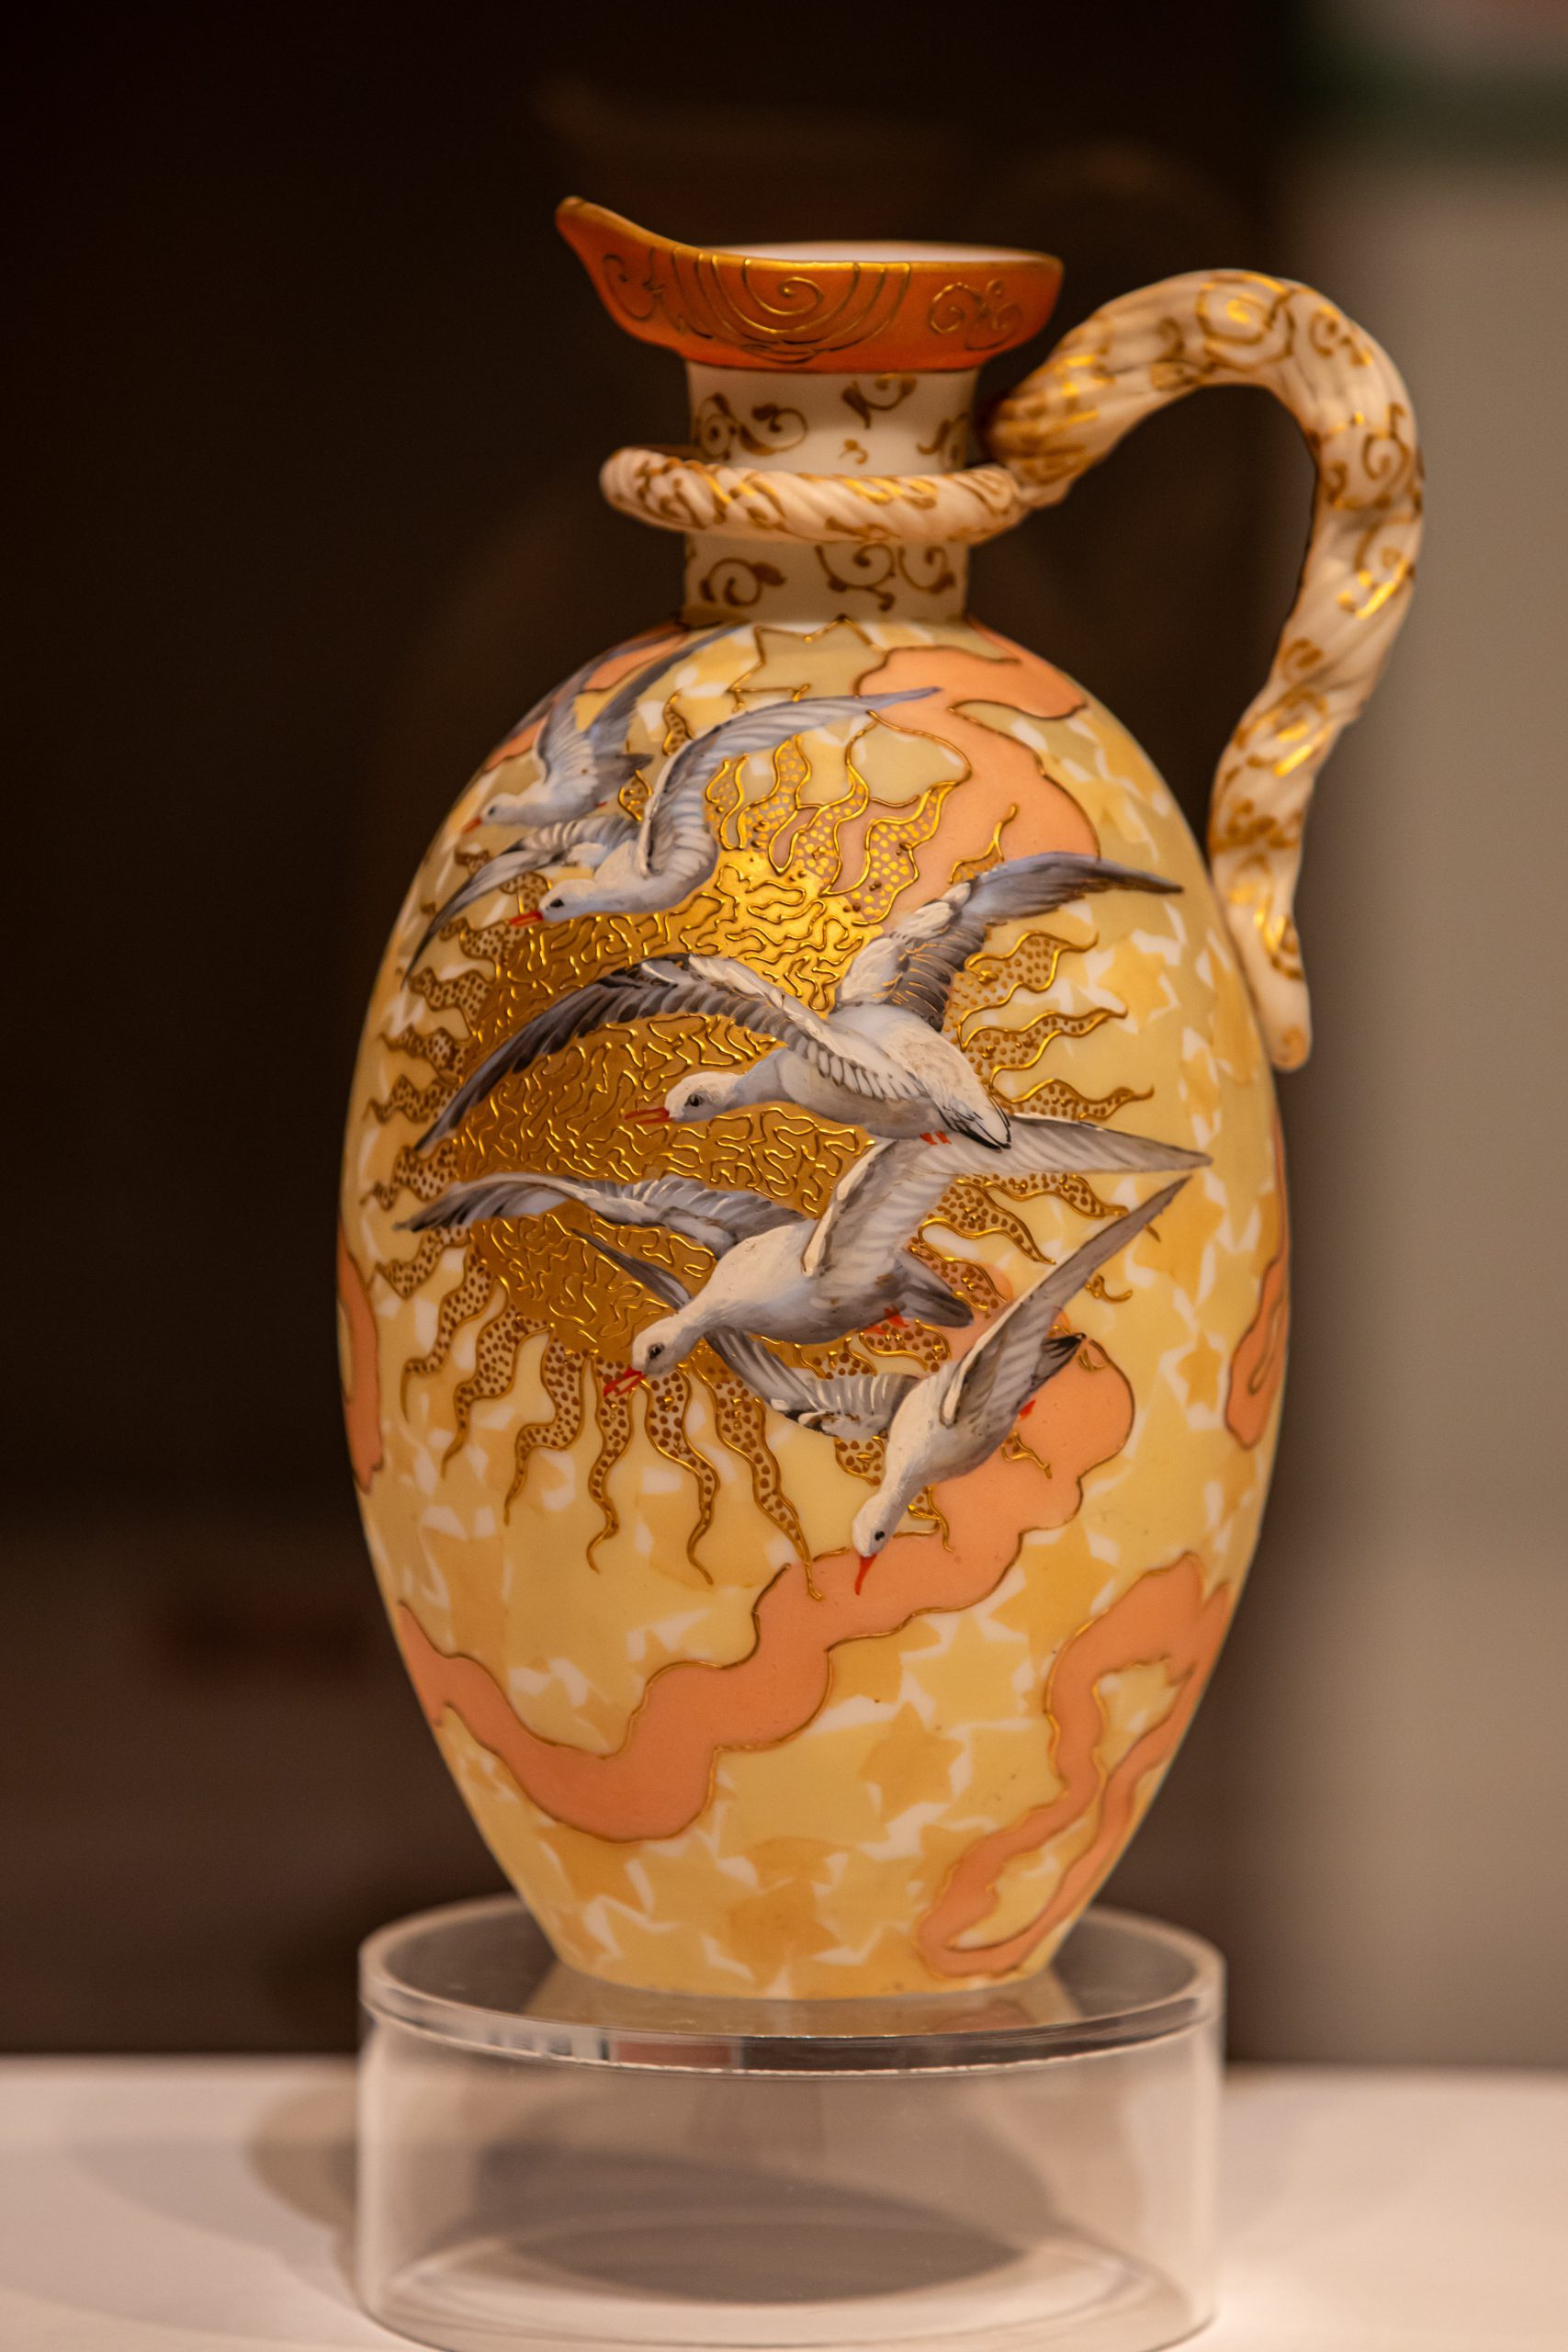 Decorative pitcher featuring seagulls on the body.